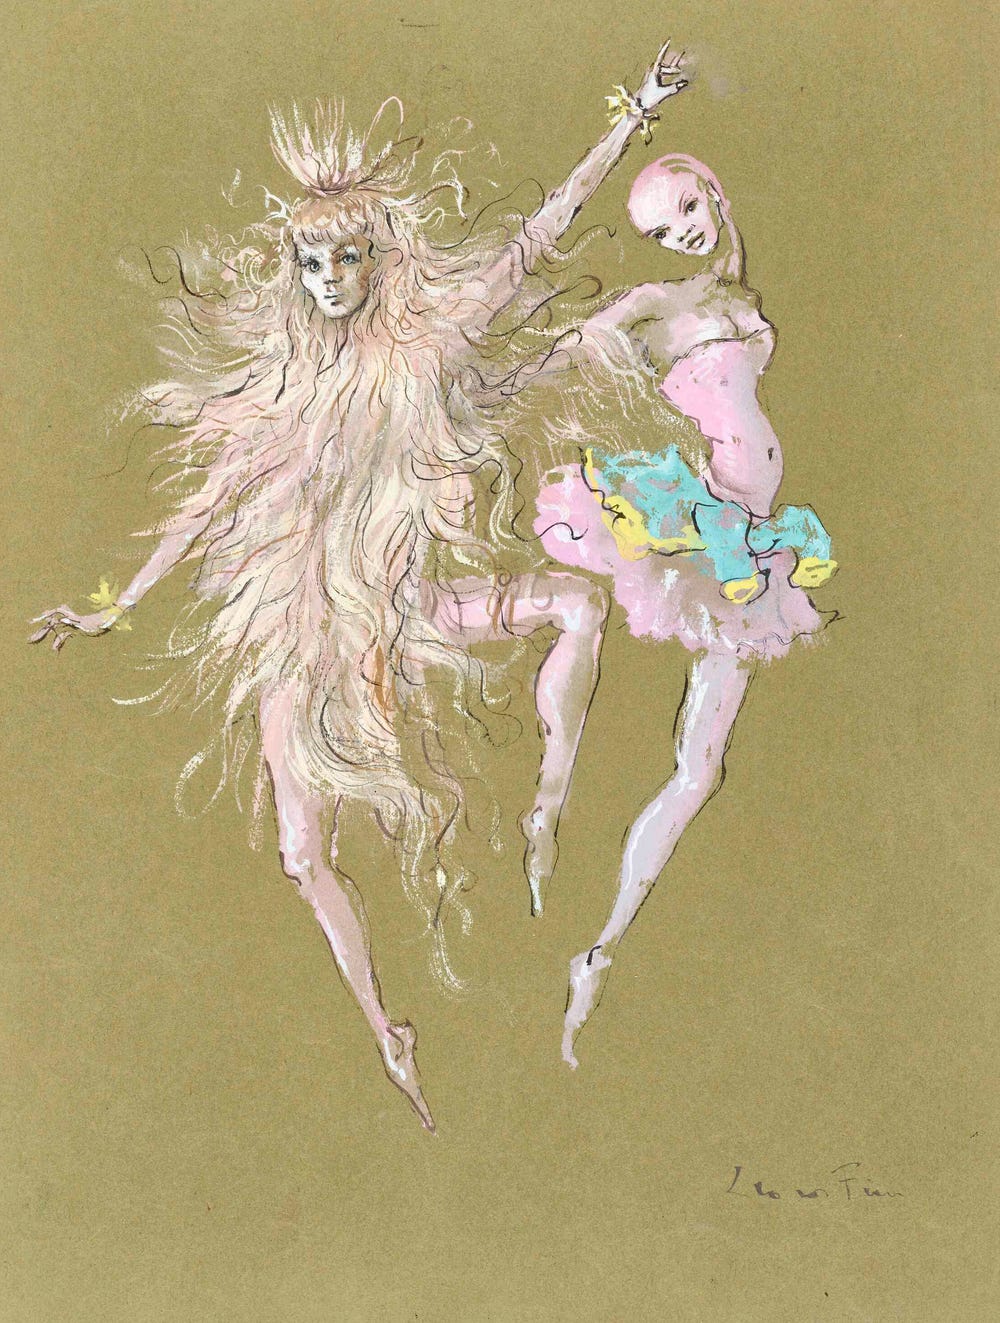 Drawing of fantastical ballet dancers by Leonor Fini